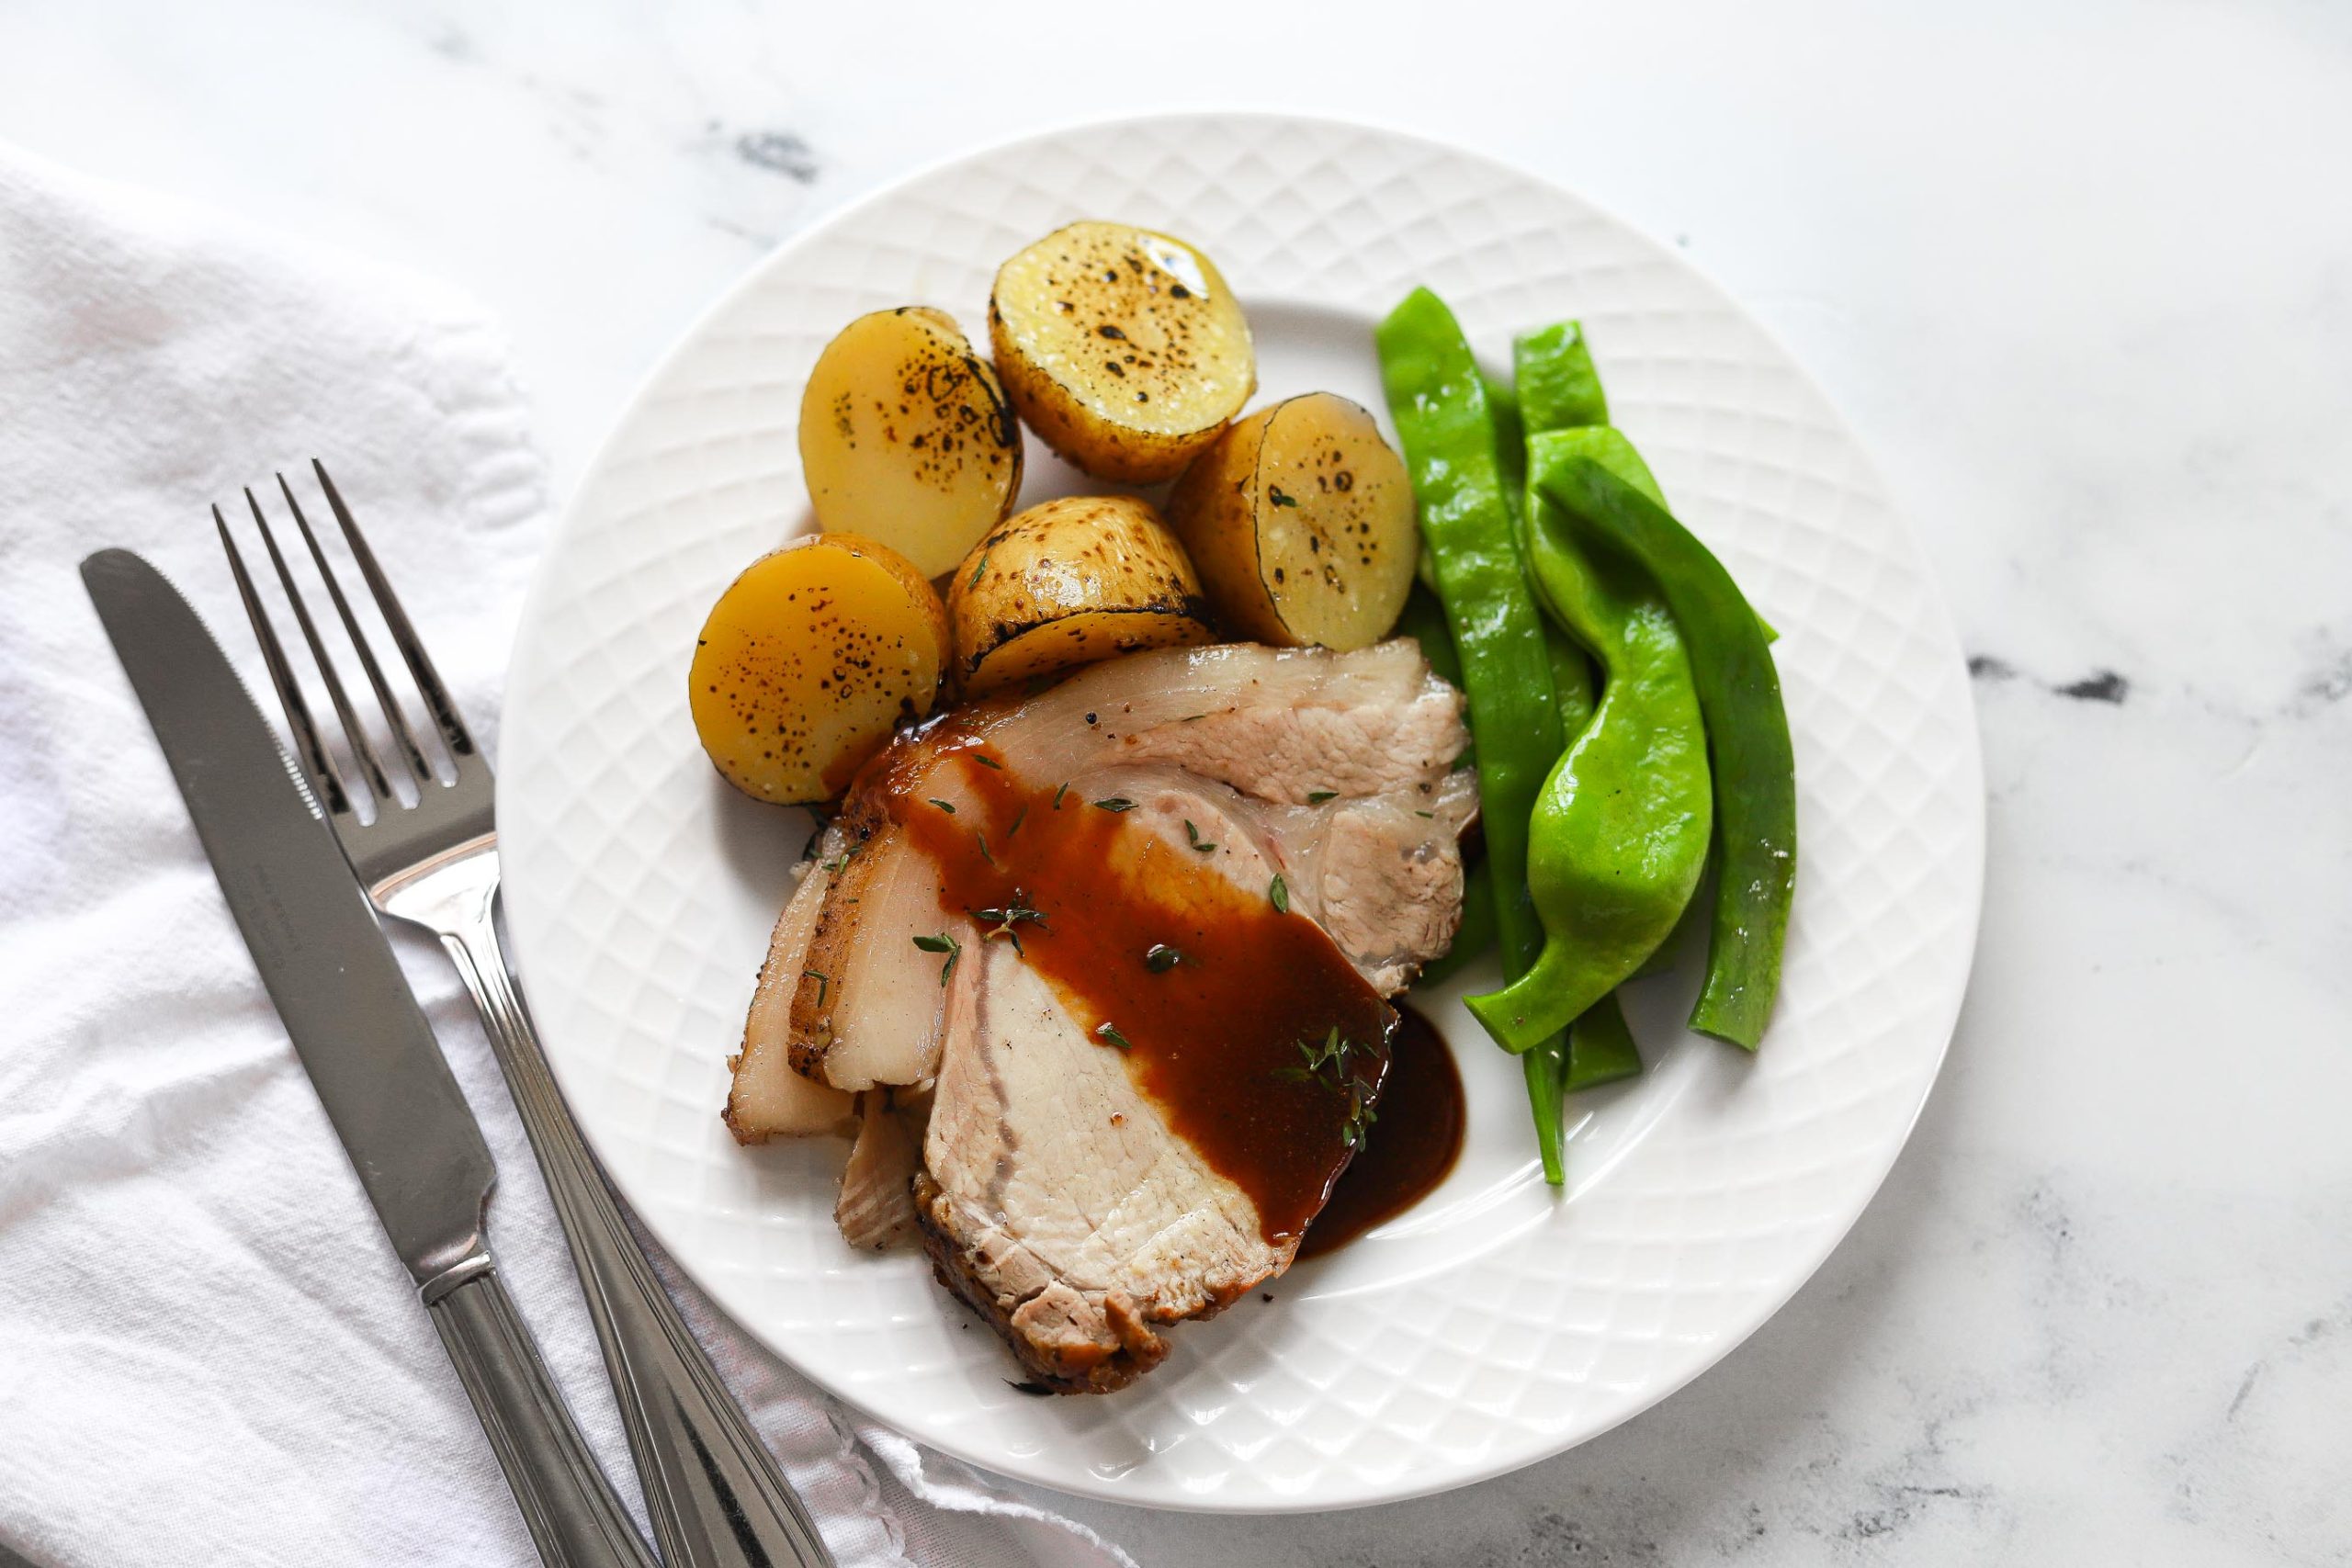 pork loin plated with green beans, potatoes, and glaze